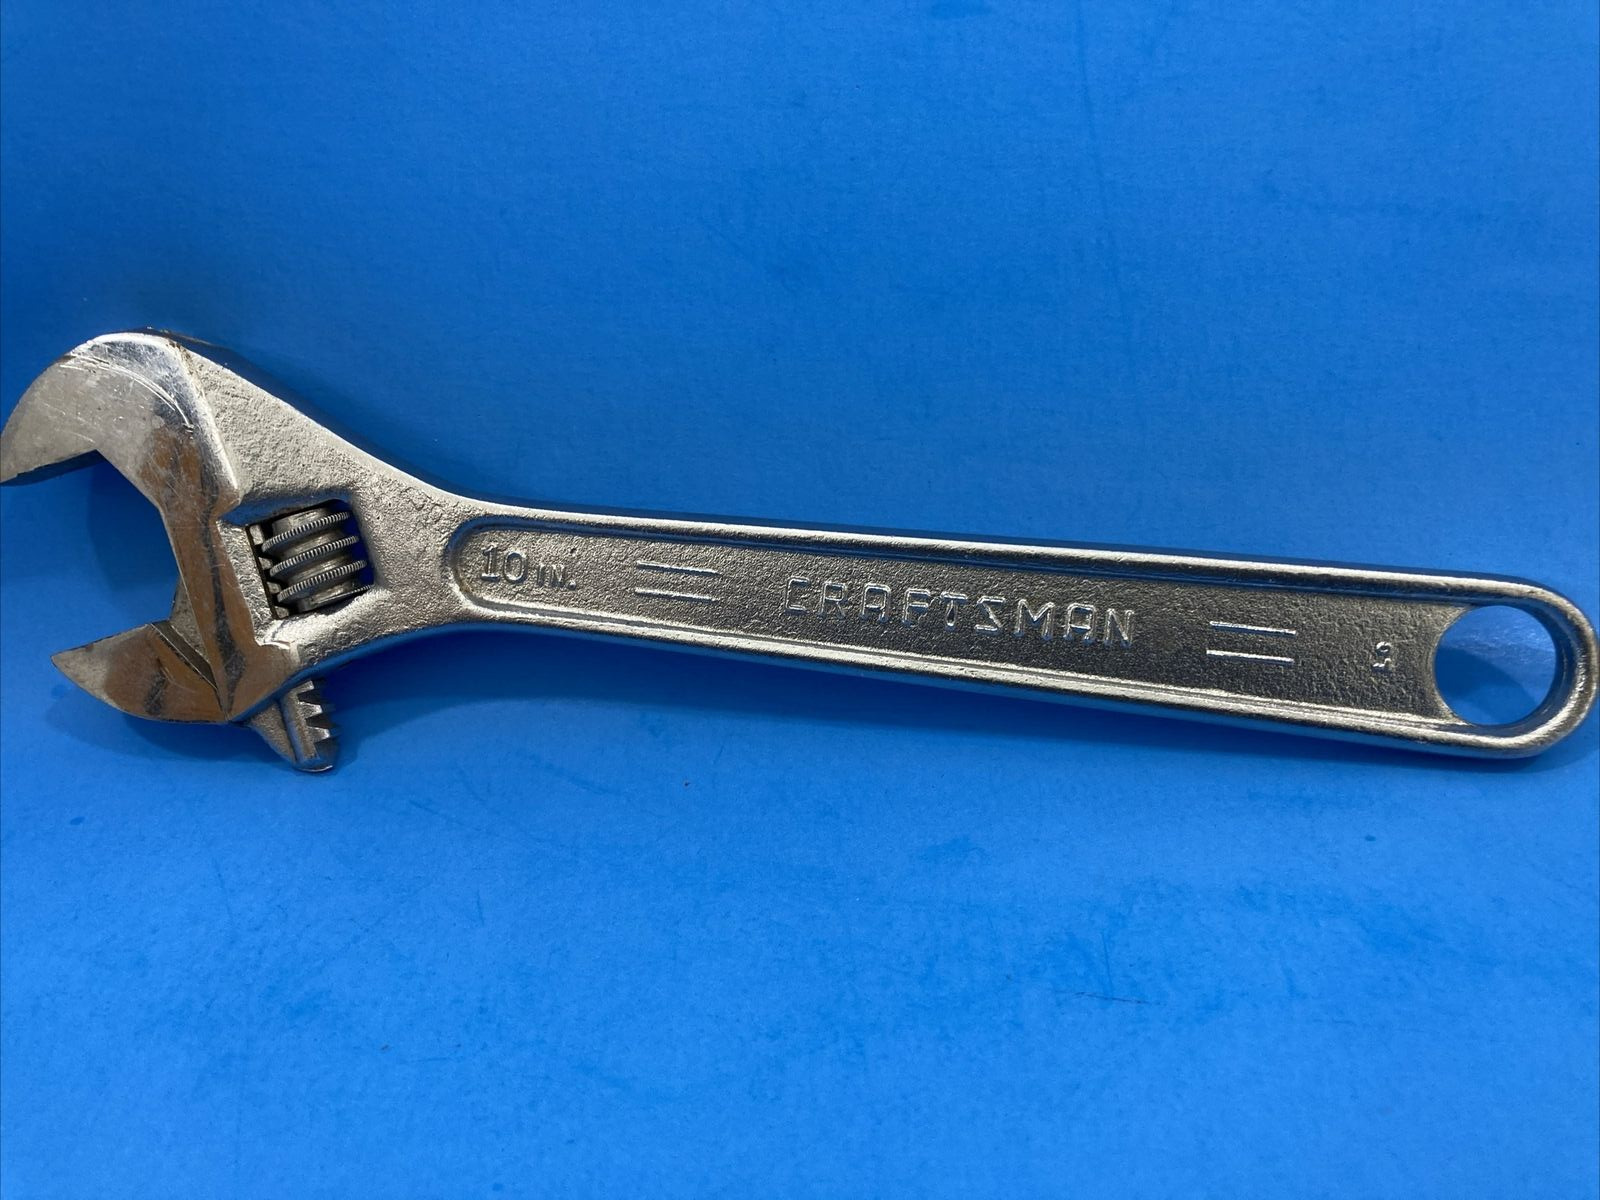 Vintage CRAFTSMAN USA 10 inch Forged Alloy Adjustable Wrench USA Made FS